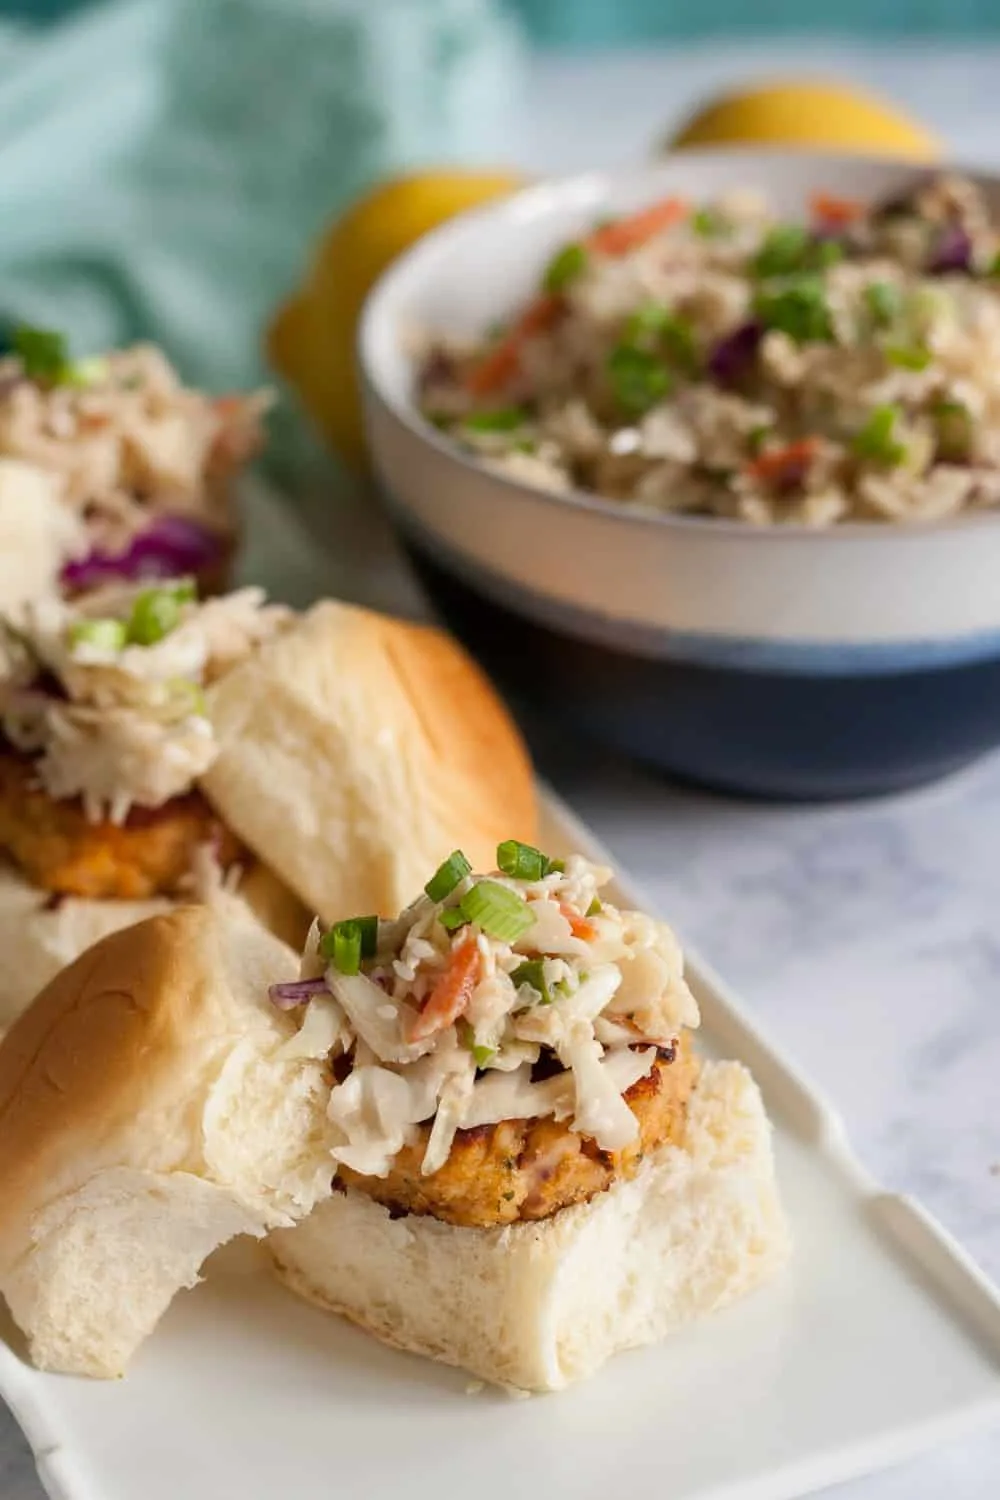 A tasty Earth Day recipe, these Asian tuna sliders are made with sustainable tuna. * Recipe on GoodieGodmother.com